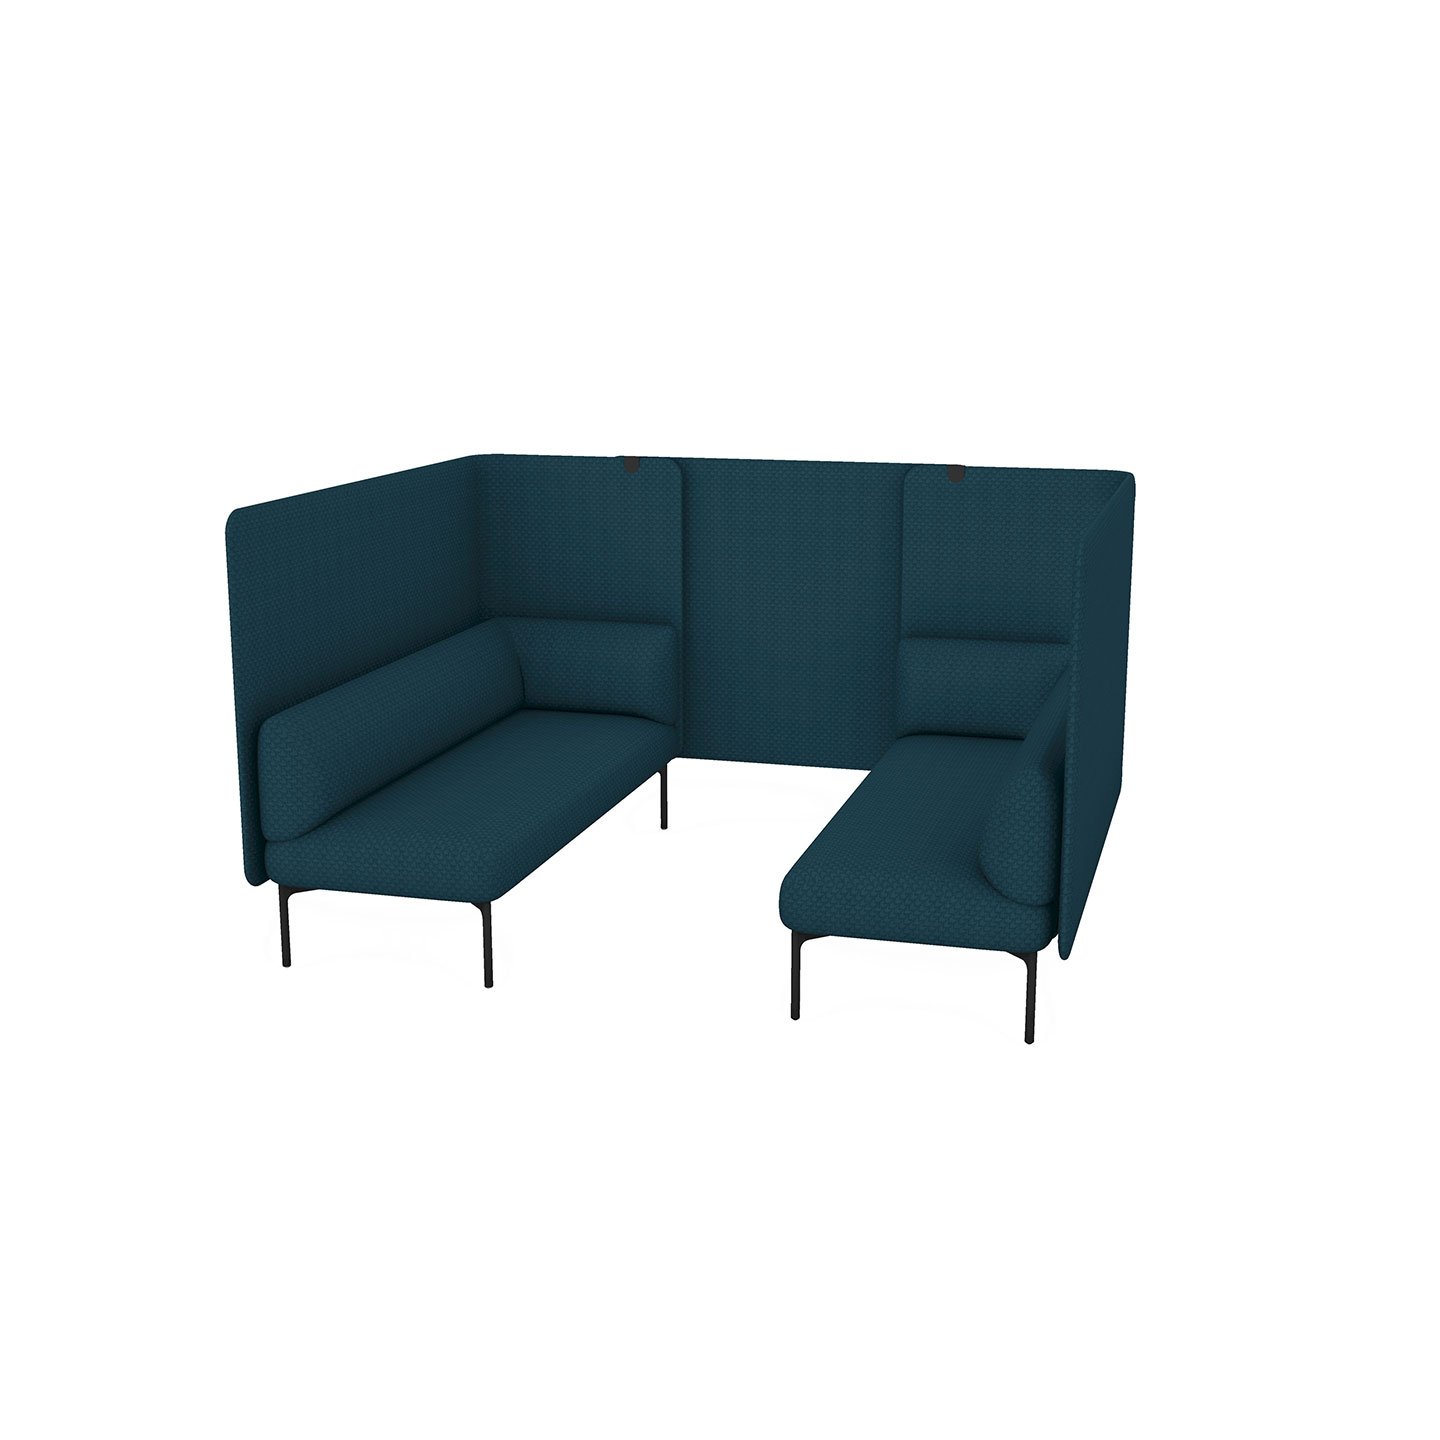 Haworth Cabana lounge connector screen in teal blue color connecting two lounges in a private space